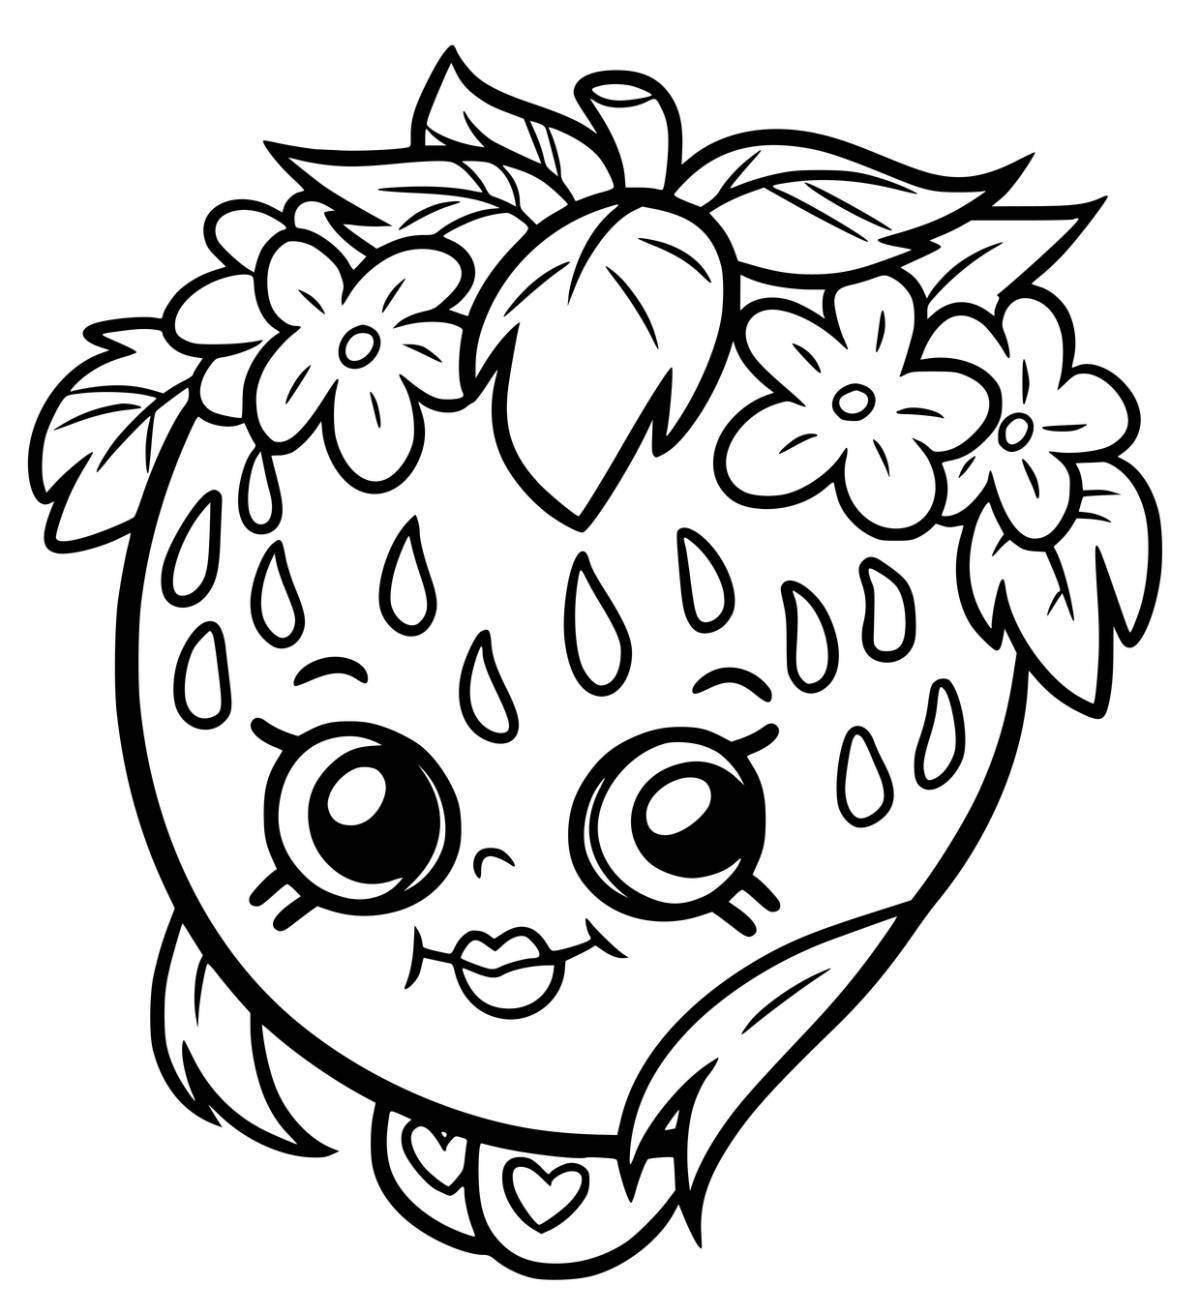 Coloring pages for girls with playful berries